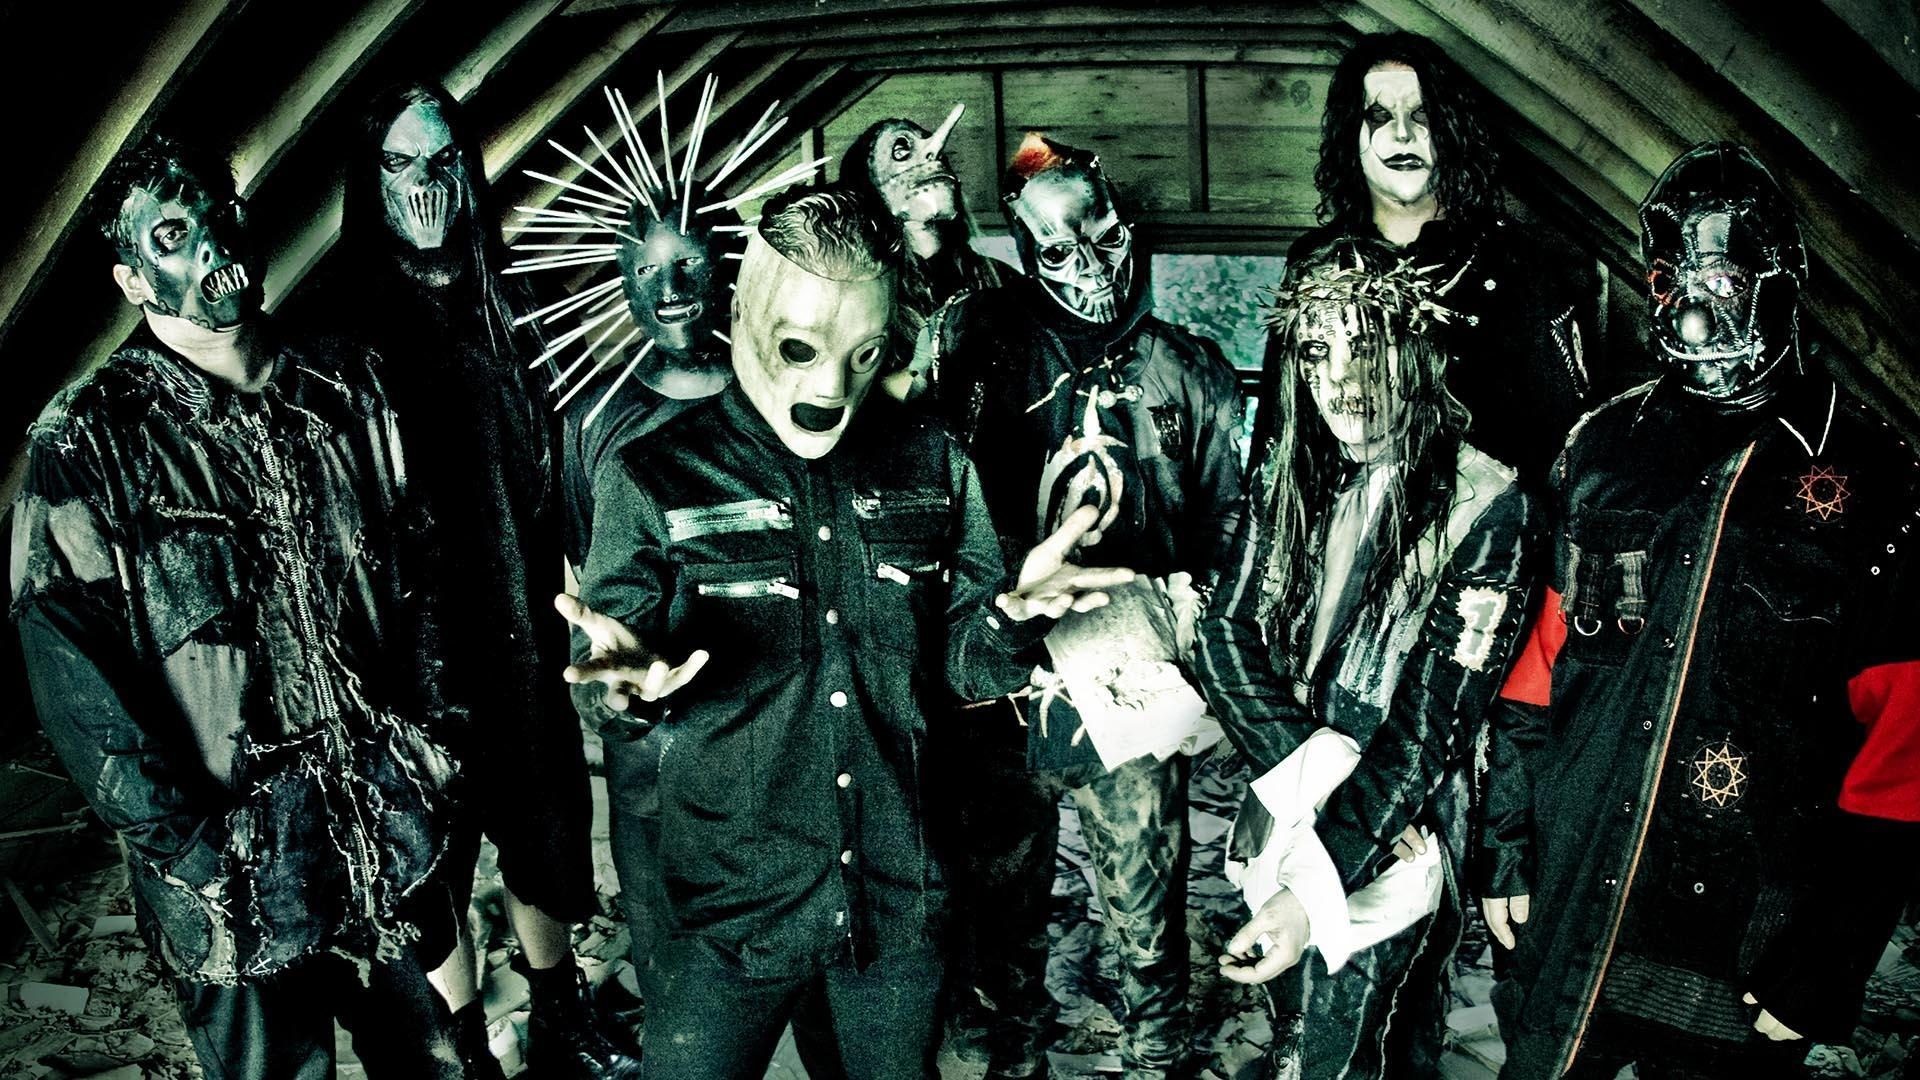 1920x1080 High Definition Wallpaper Of The American Heavy Metal Band, Slipknot |  PaperPull